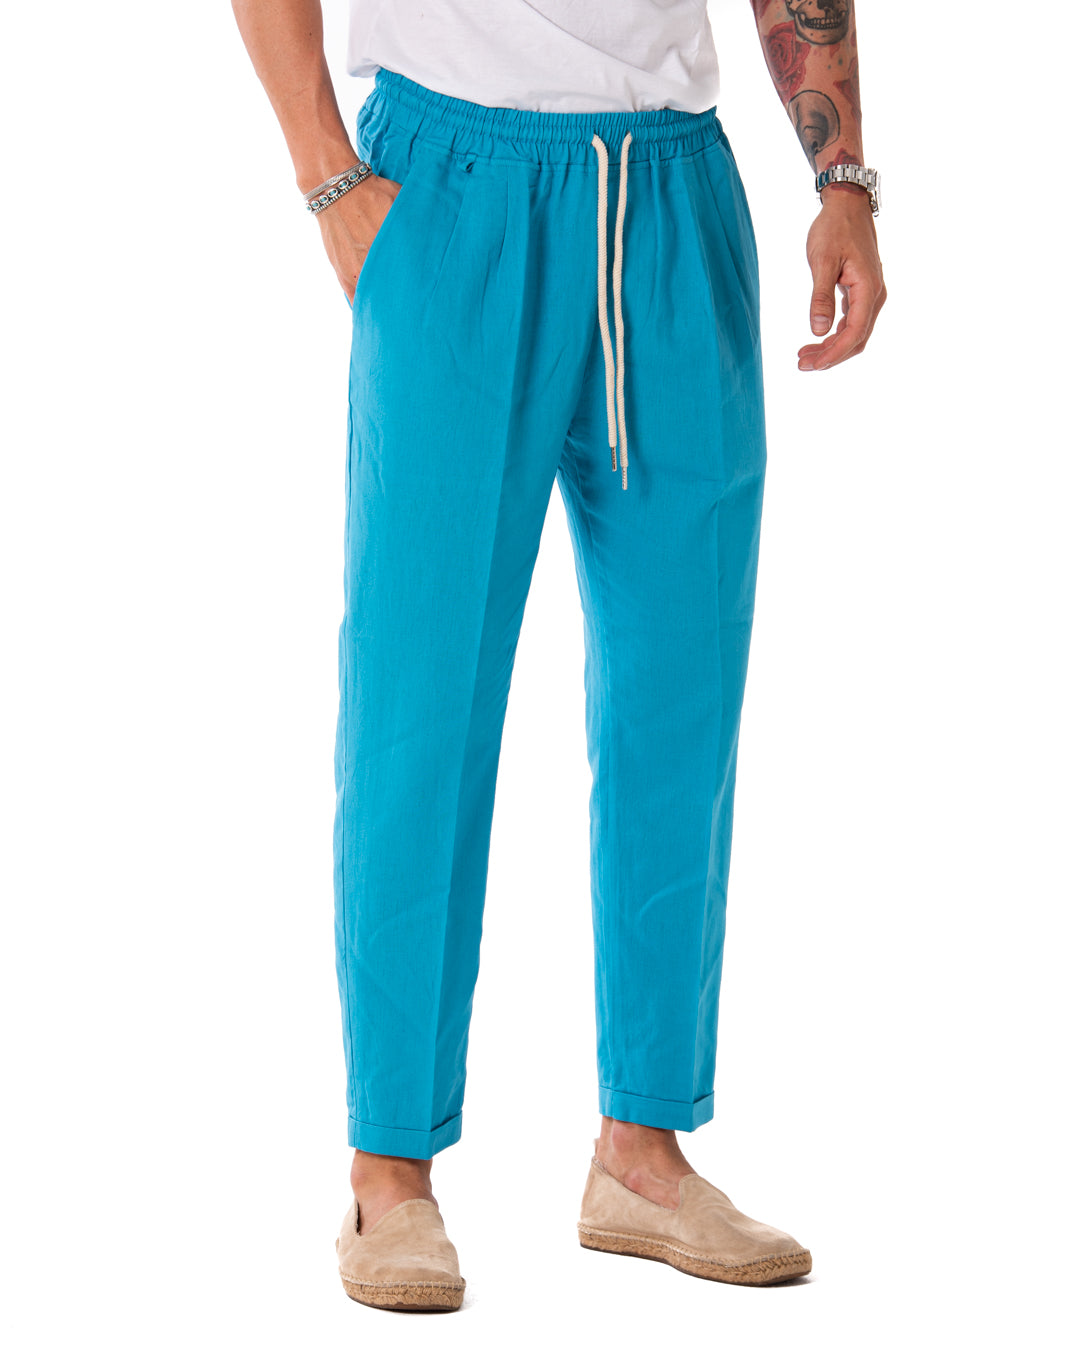 Larry - turquoise linen trousers